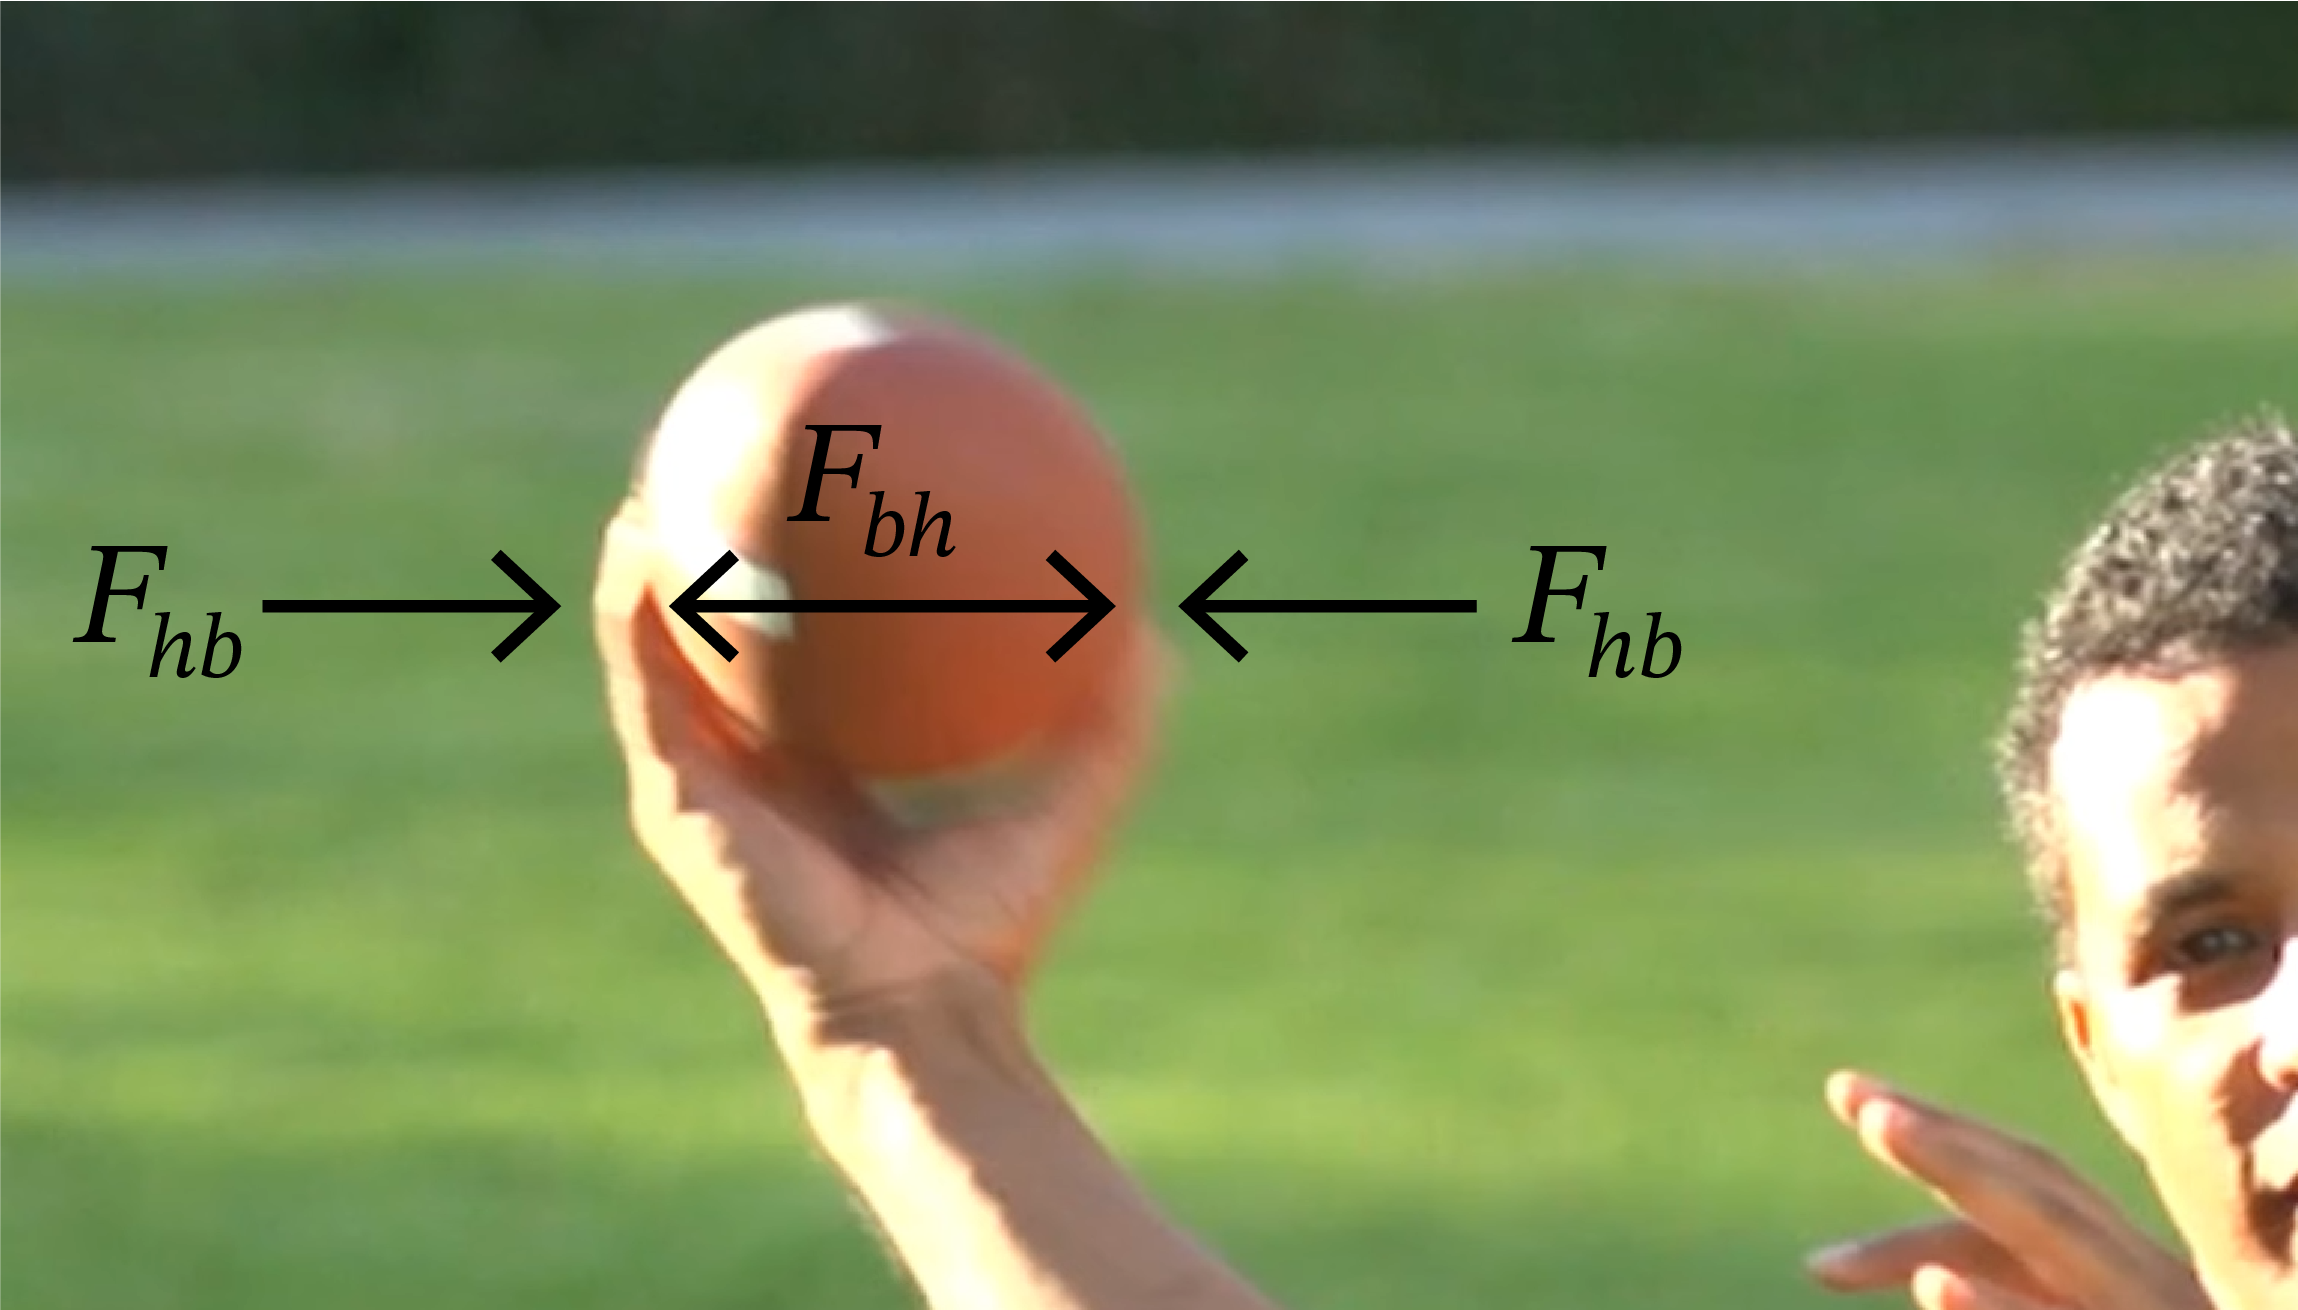 Forces between football and hand